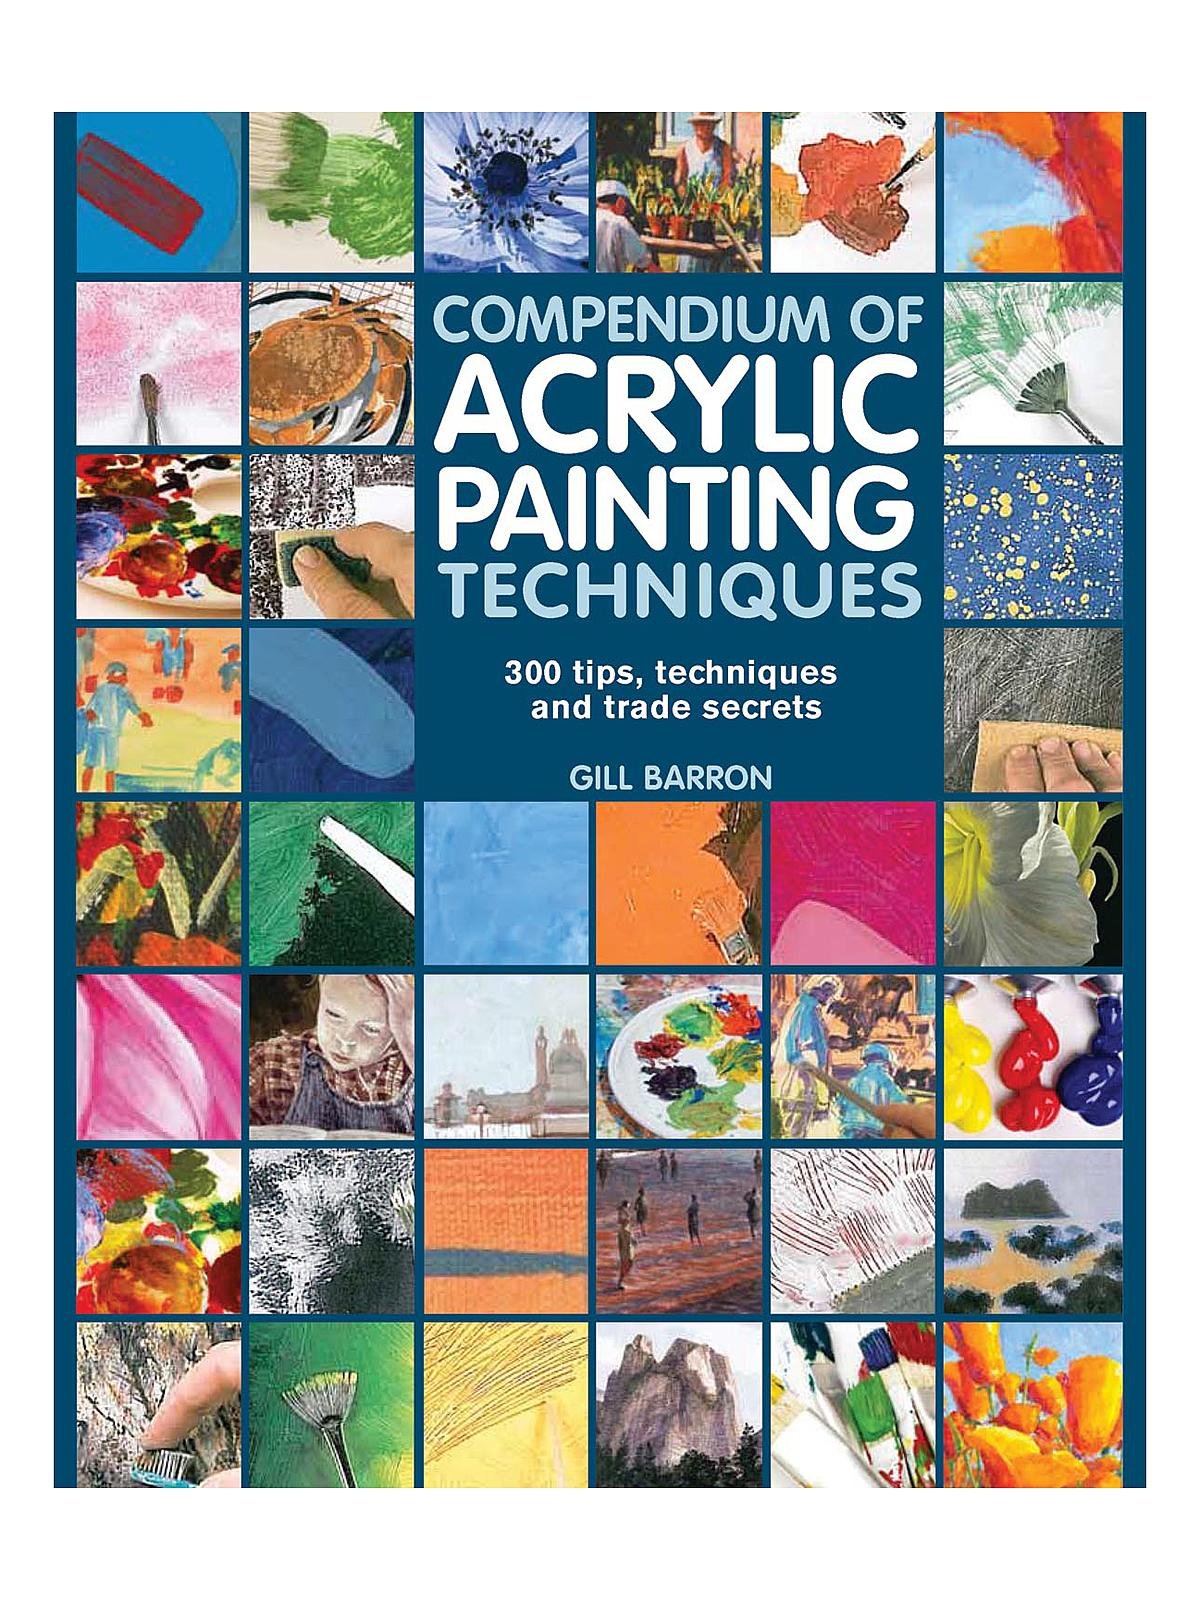 Search Press - Compendium of Acrylic Painting Techniques